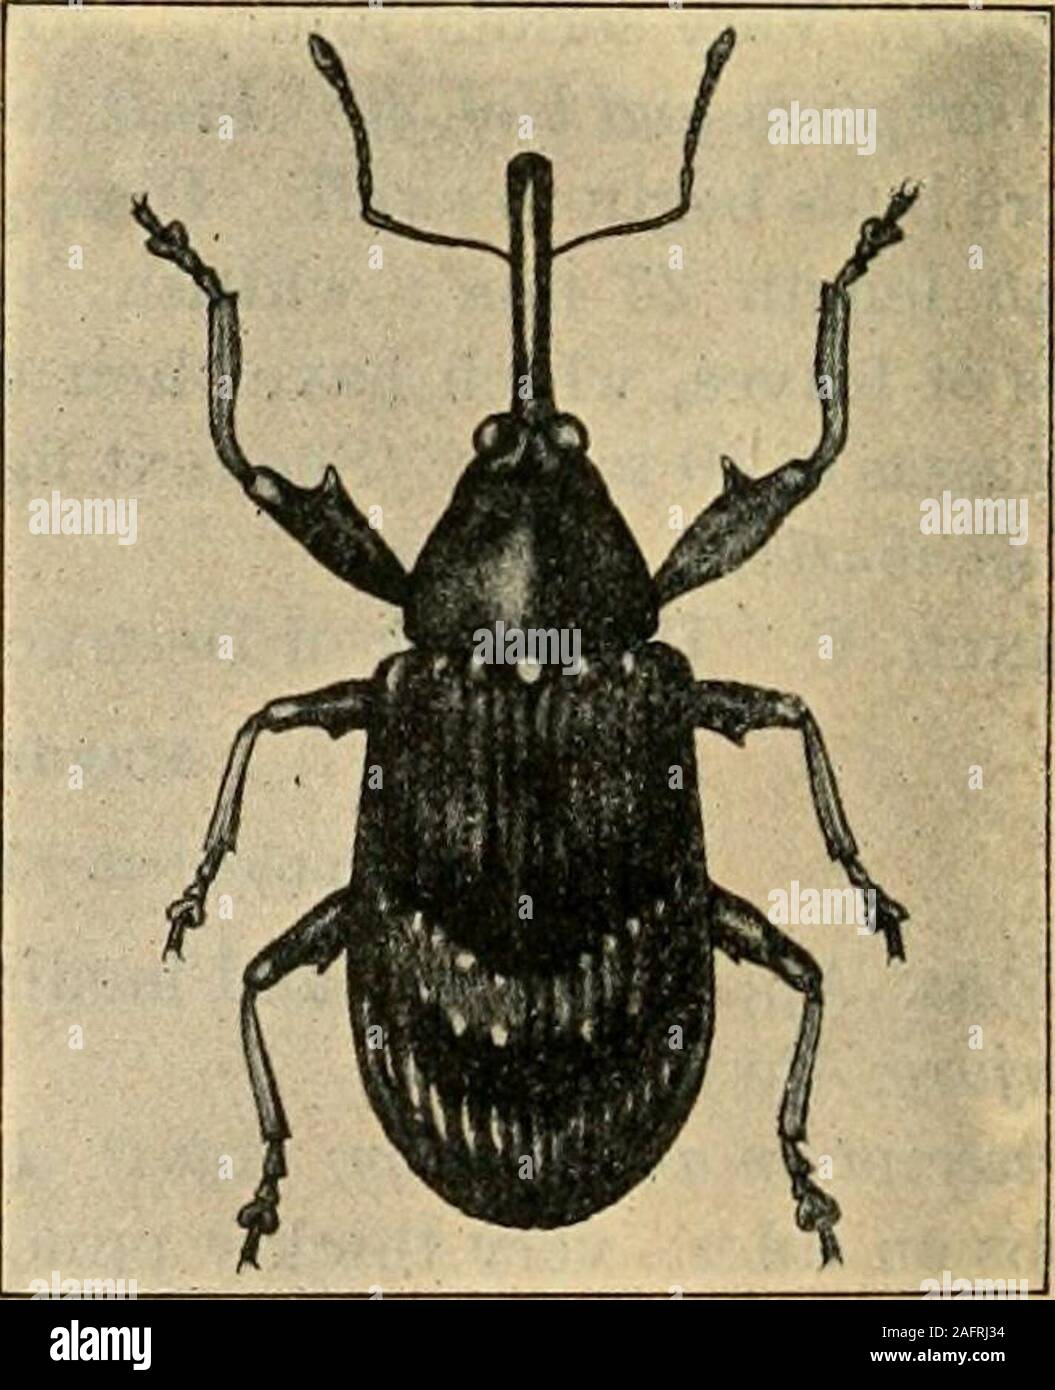 . A manual of dangerous insects likely to be introduced in the United States through importations. a b Fig. 7.—Work of apple weevils: a, Apple buds injured by Anthonomus pomorum (Henschel);^6, appl«root tunneled by Leptops hopei (French). Anthonomus pomorum Linnaeus.(Apple-blossom Weevil. Curculionidae; Coleoptera.) Host: Apple, pear. Injury: Often very destructive to apple.Larva injurious to buds and blossoms; adultfeeds on leaves. Description and biology: Adult length 3 to4 mm.; pitch black or fuscous black, withashy pubescence; most easily recognized bypale V-shaped mark on elytra. Appear i Stock Photo